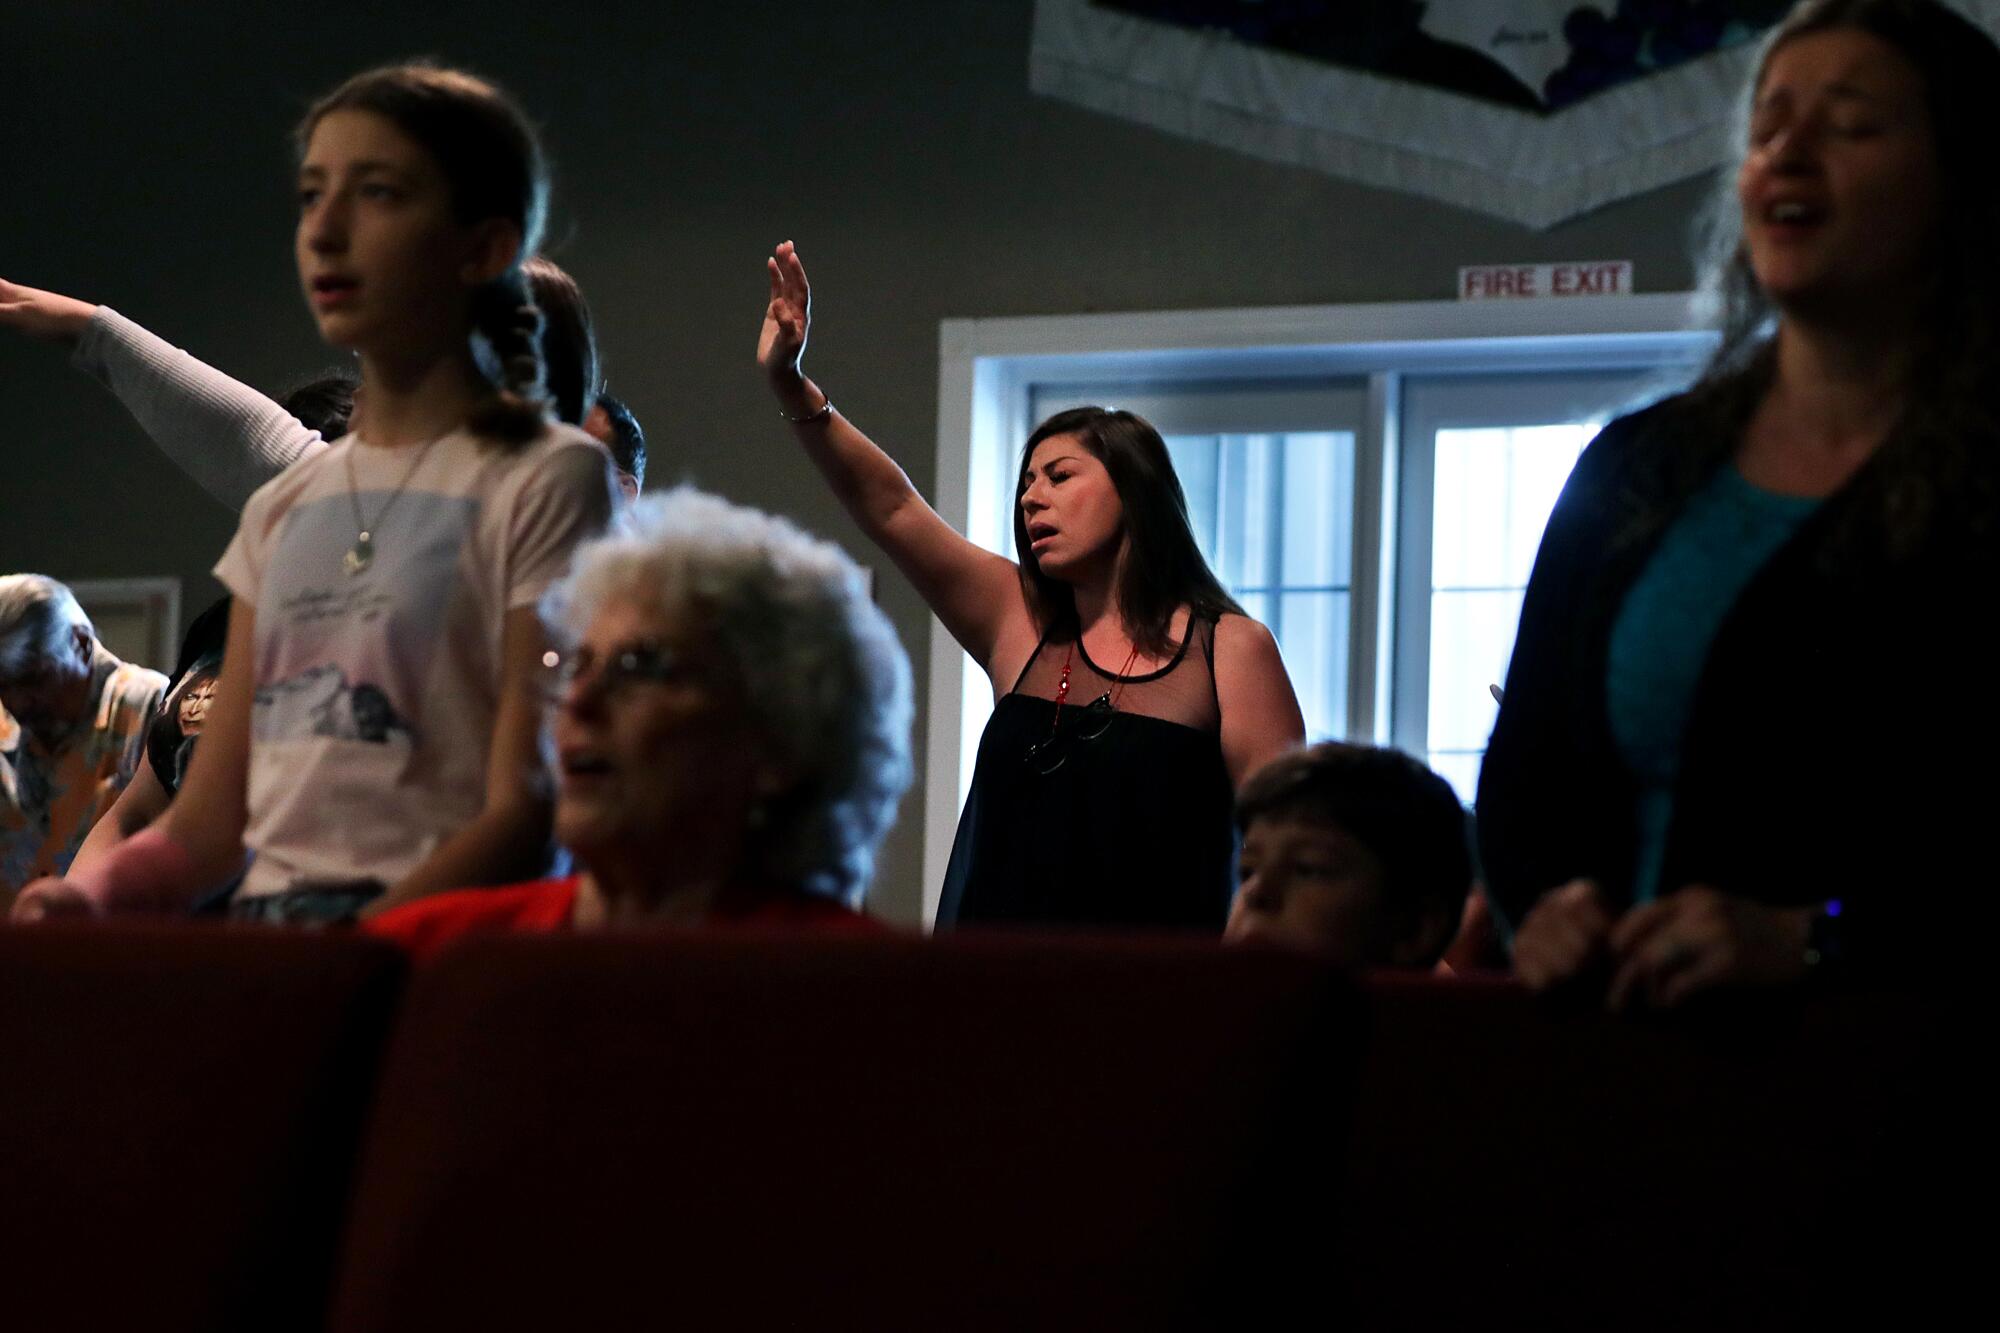 Worshipers, including Cindy Meddinna, center, gather for a service at Bundy Canyon Christian Church in Wildomar, Calif.